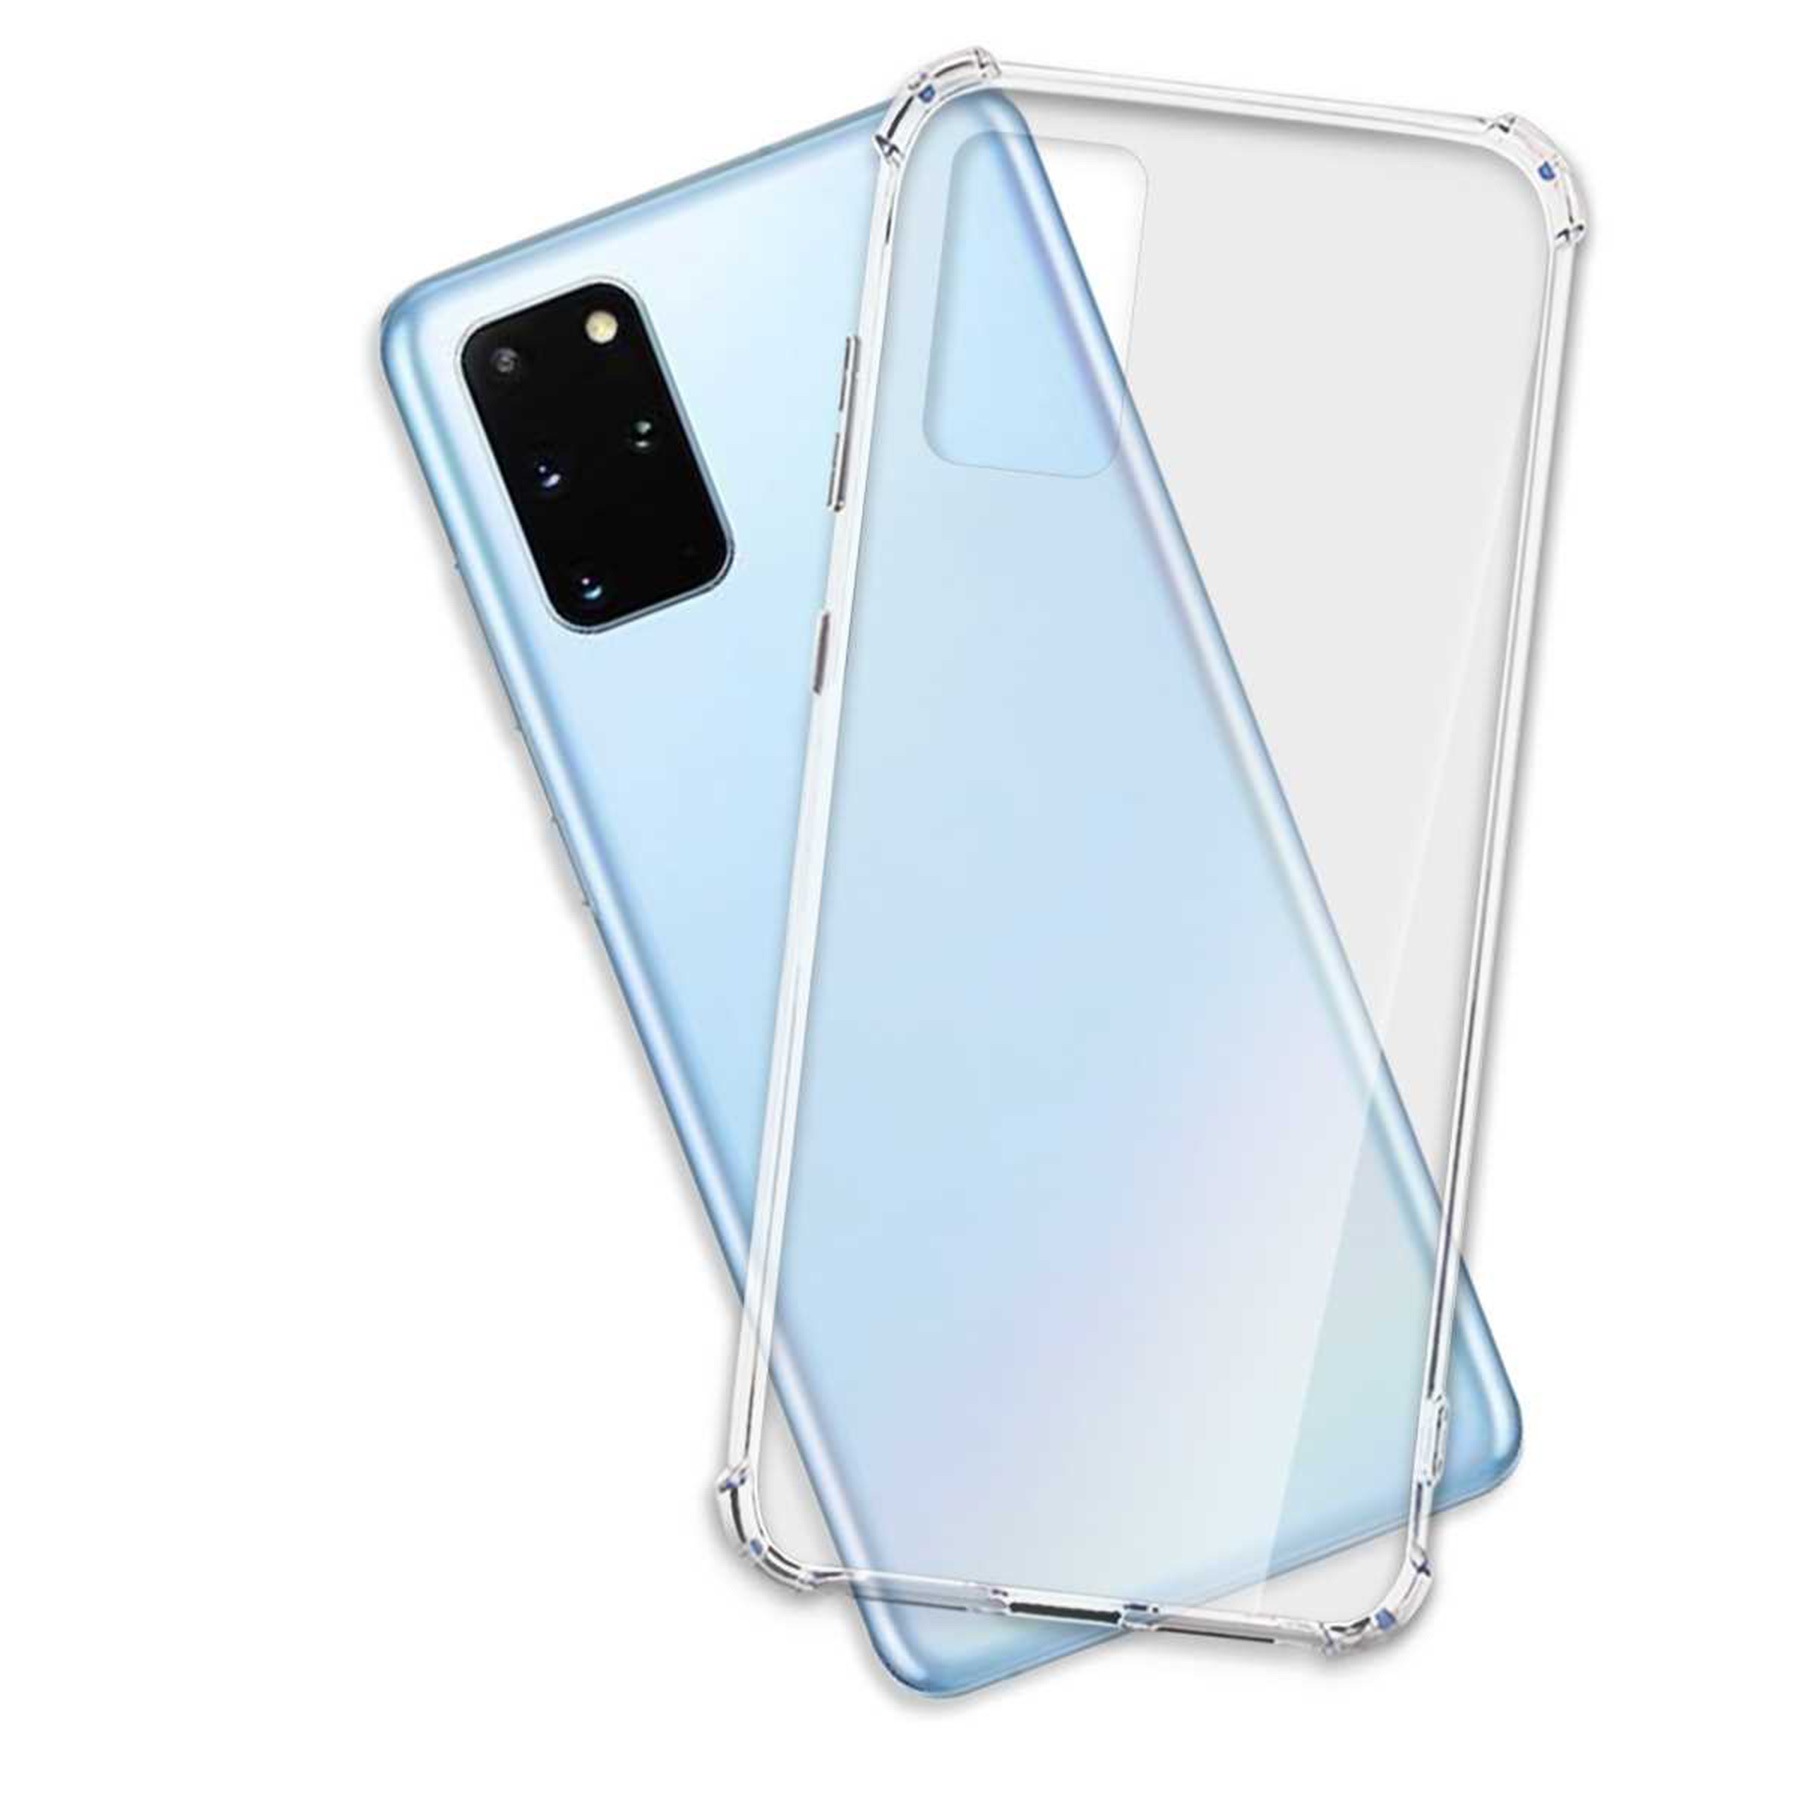 Transparent MTB Clear Samsung, Plus, Backcover, S20 Case, MORE ENERGY Armor Galaxy